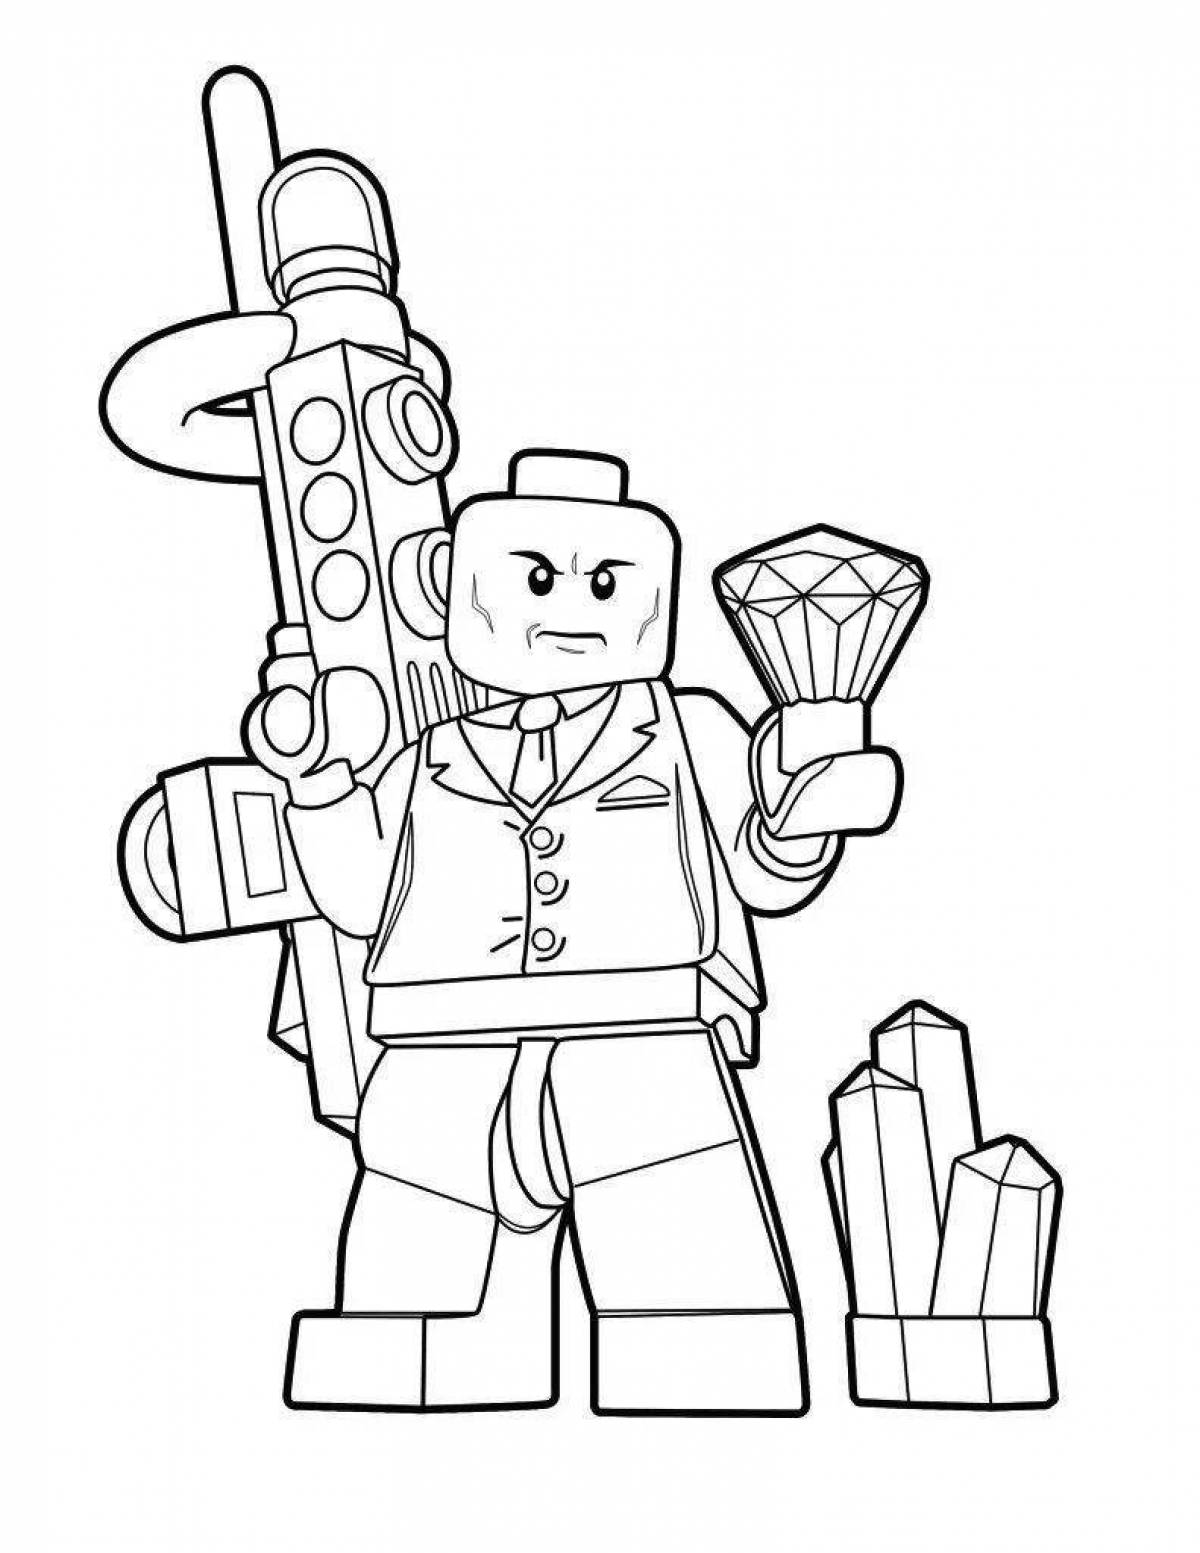 Amazing lego men coloring pages for kids